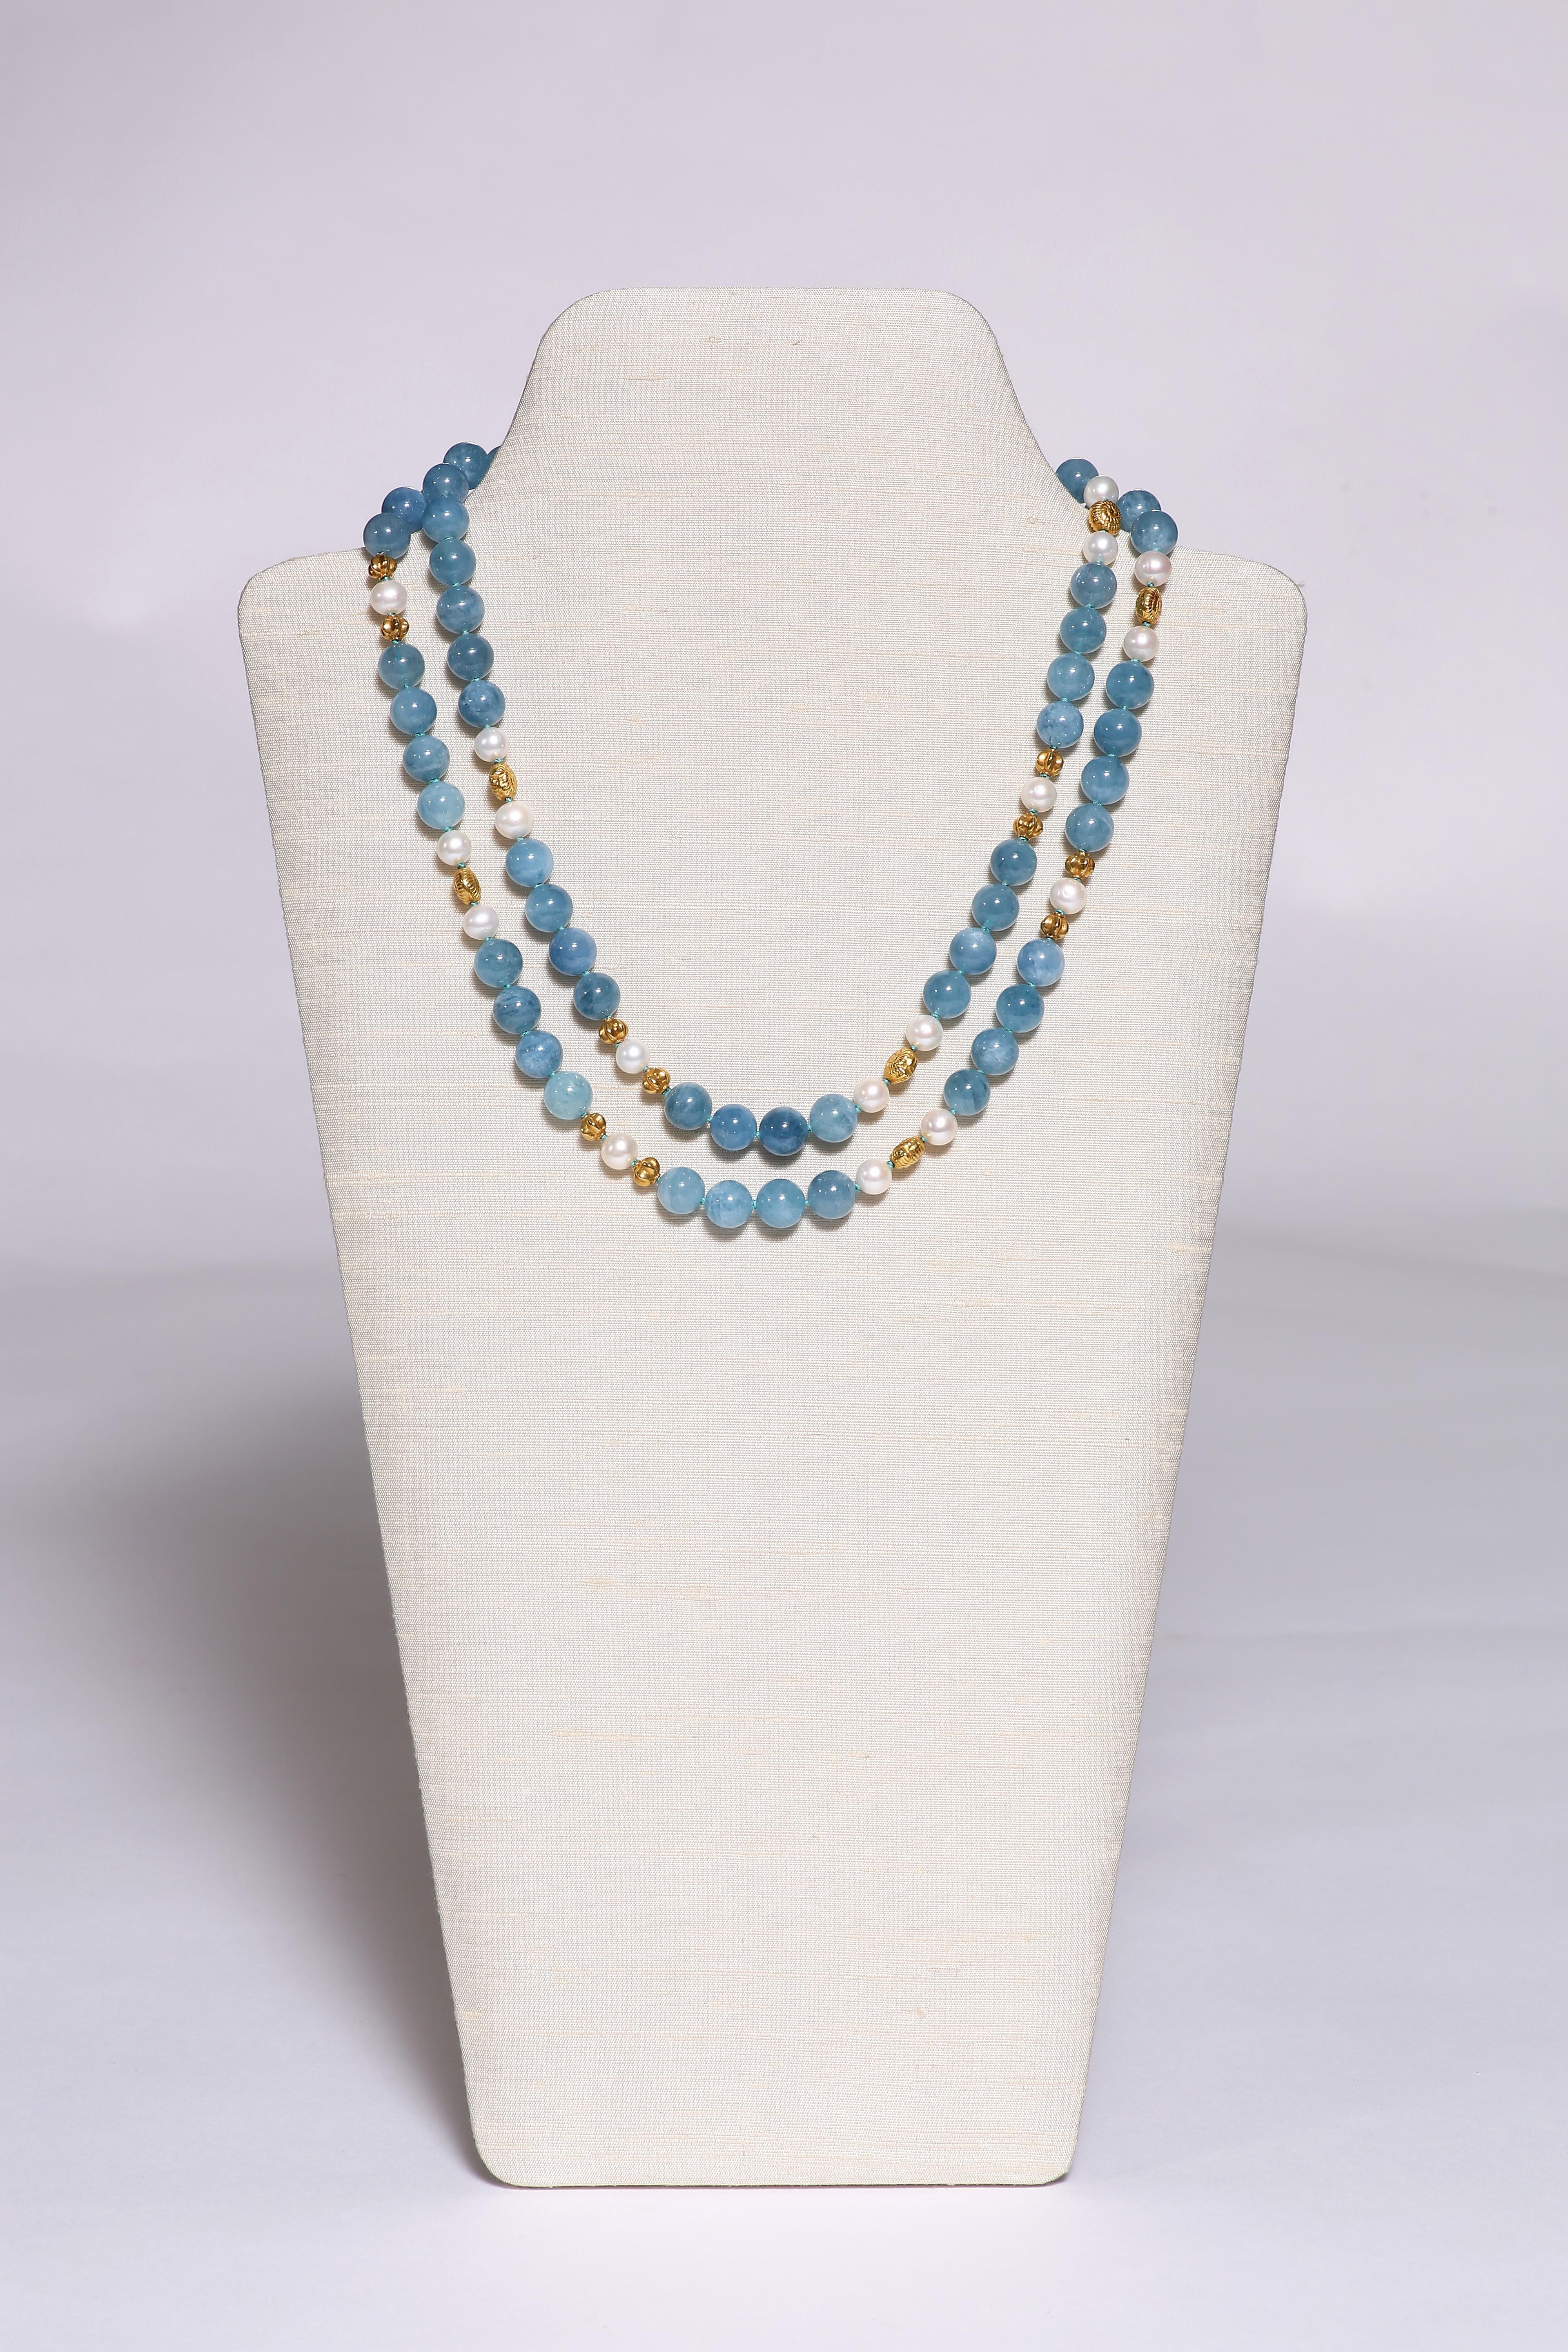 The long necklace of noble blue aquamarine, spaced by freshwater pearls and 18k gold beads ribbed or in the shape of seashells, is 41 3/4